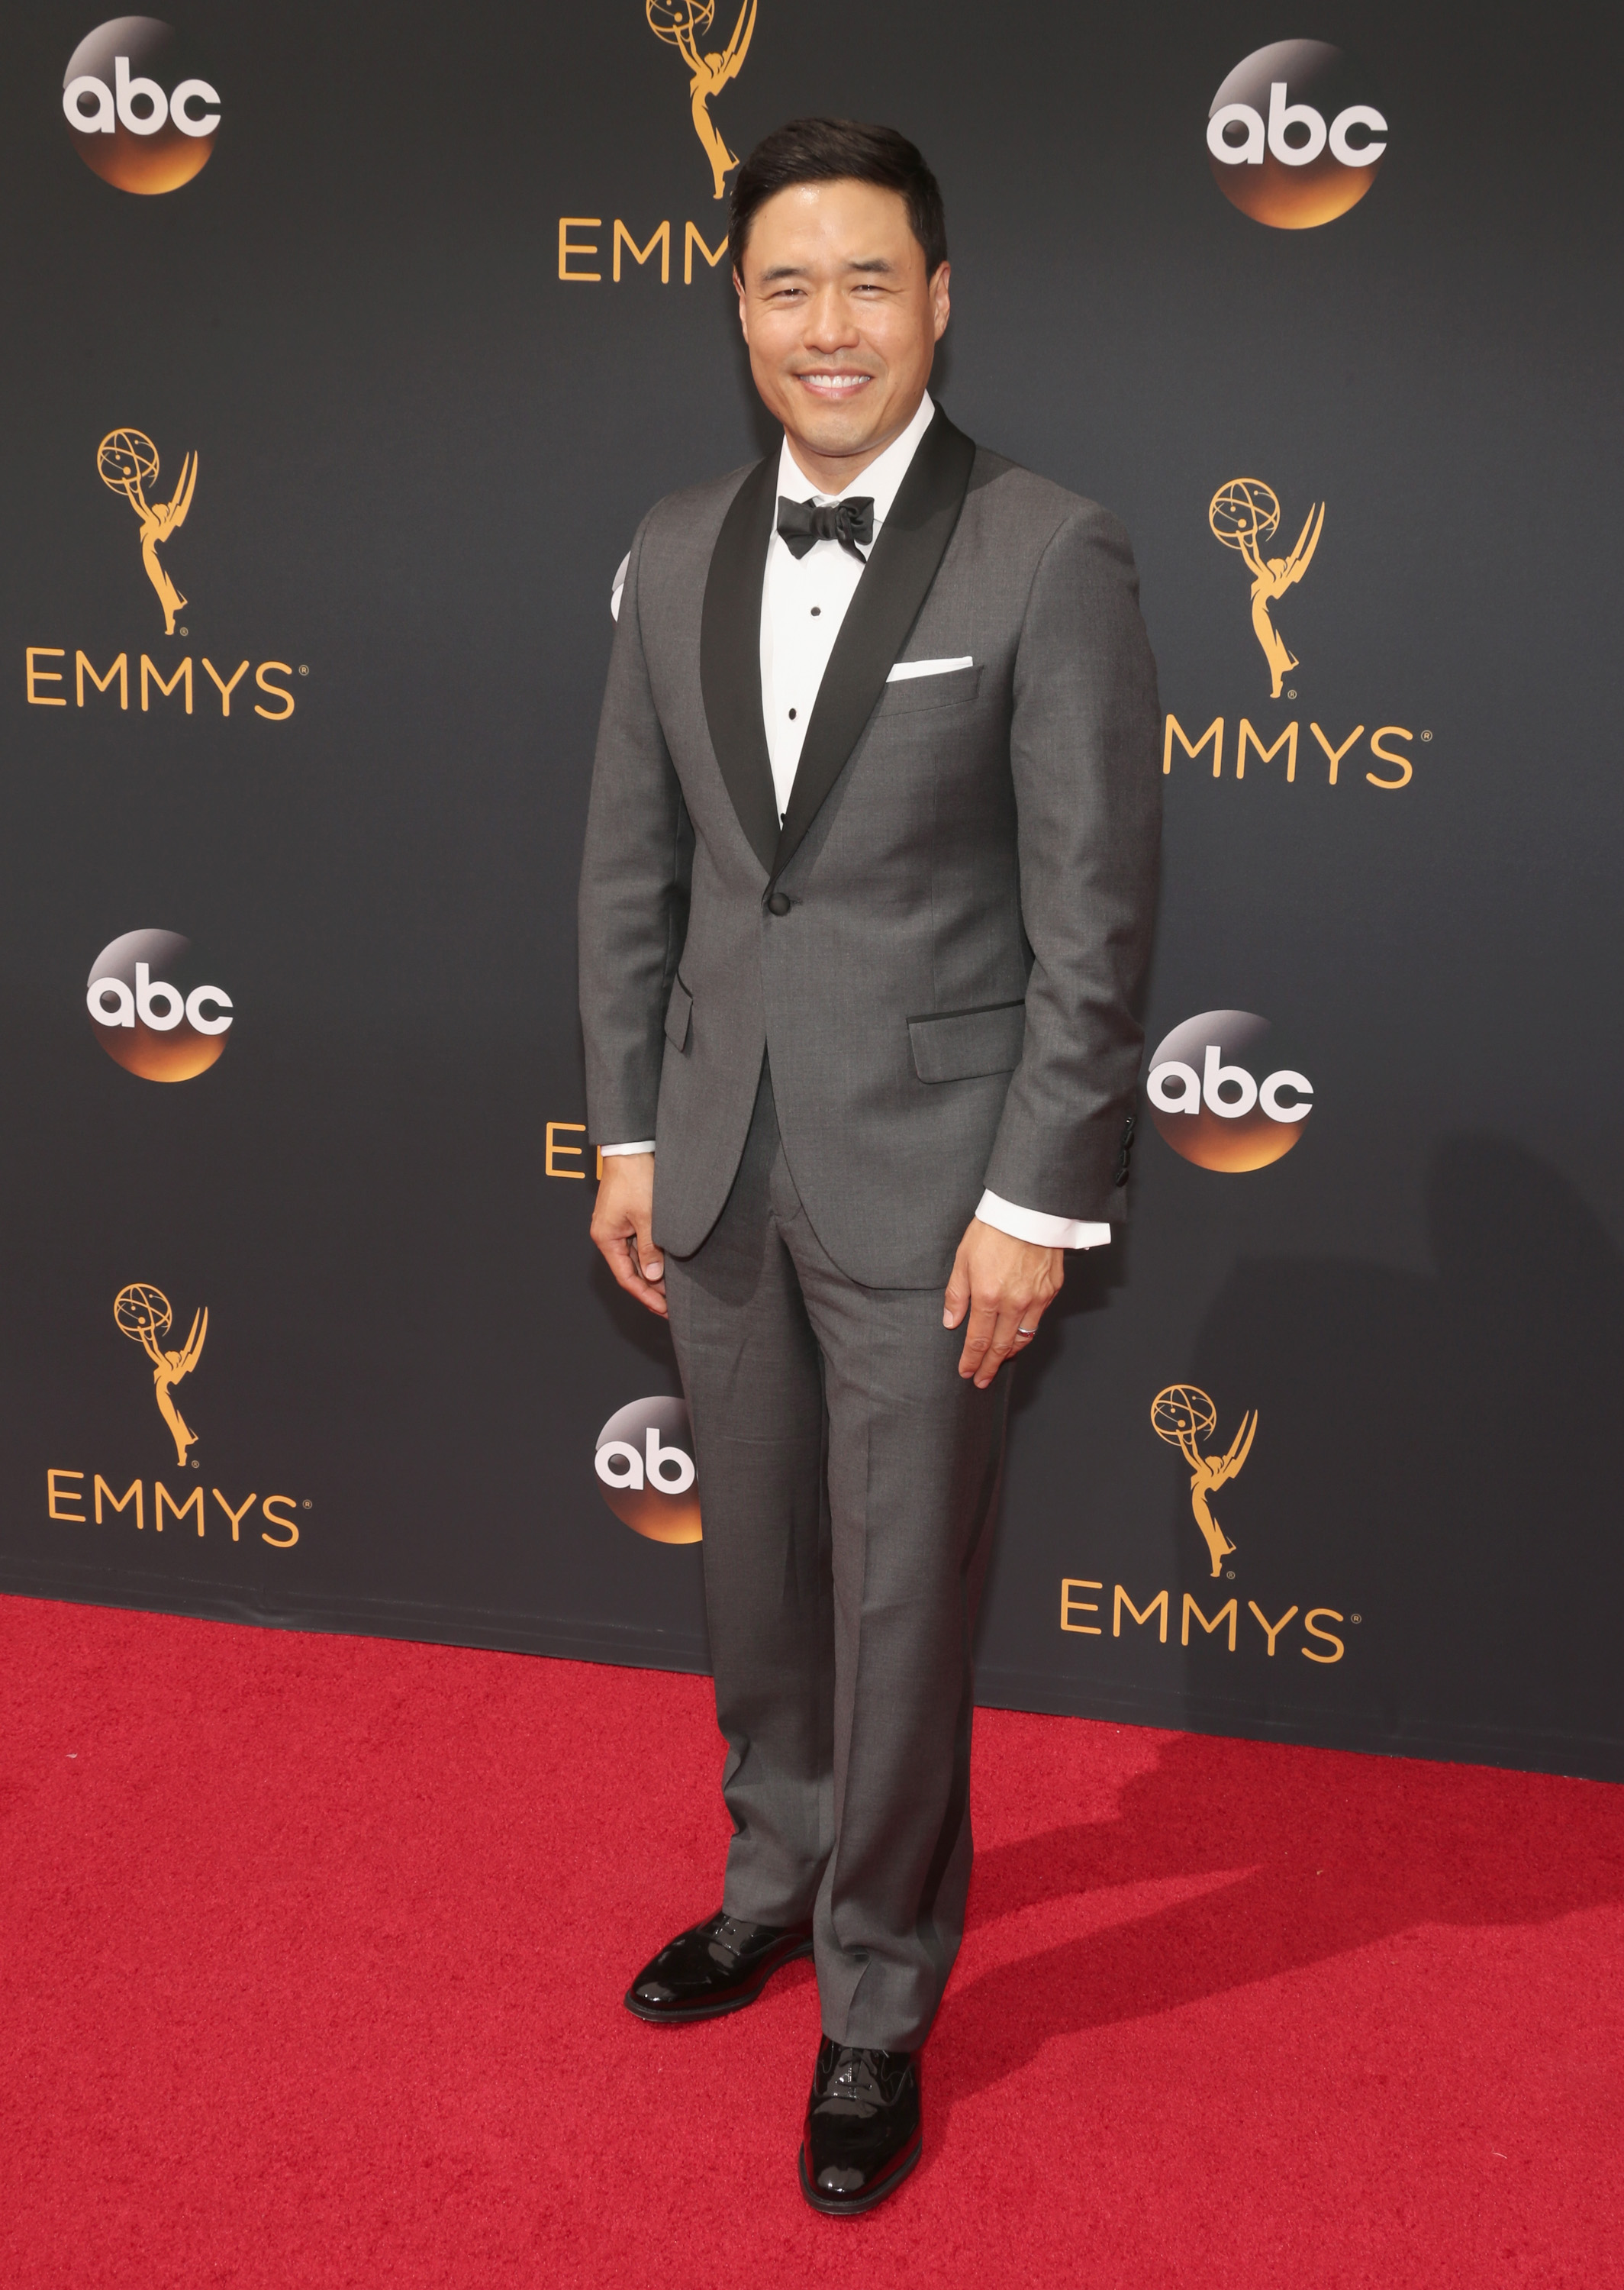 Randall Park arrives at the 68th Annual Primetime Emmy Awards at Microsoft Theater on September 18, 2016 in Los Angeles.